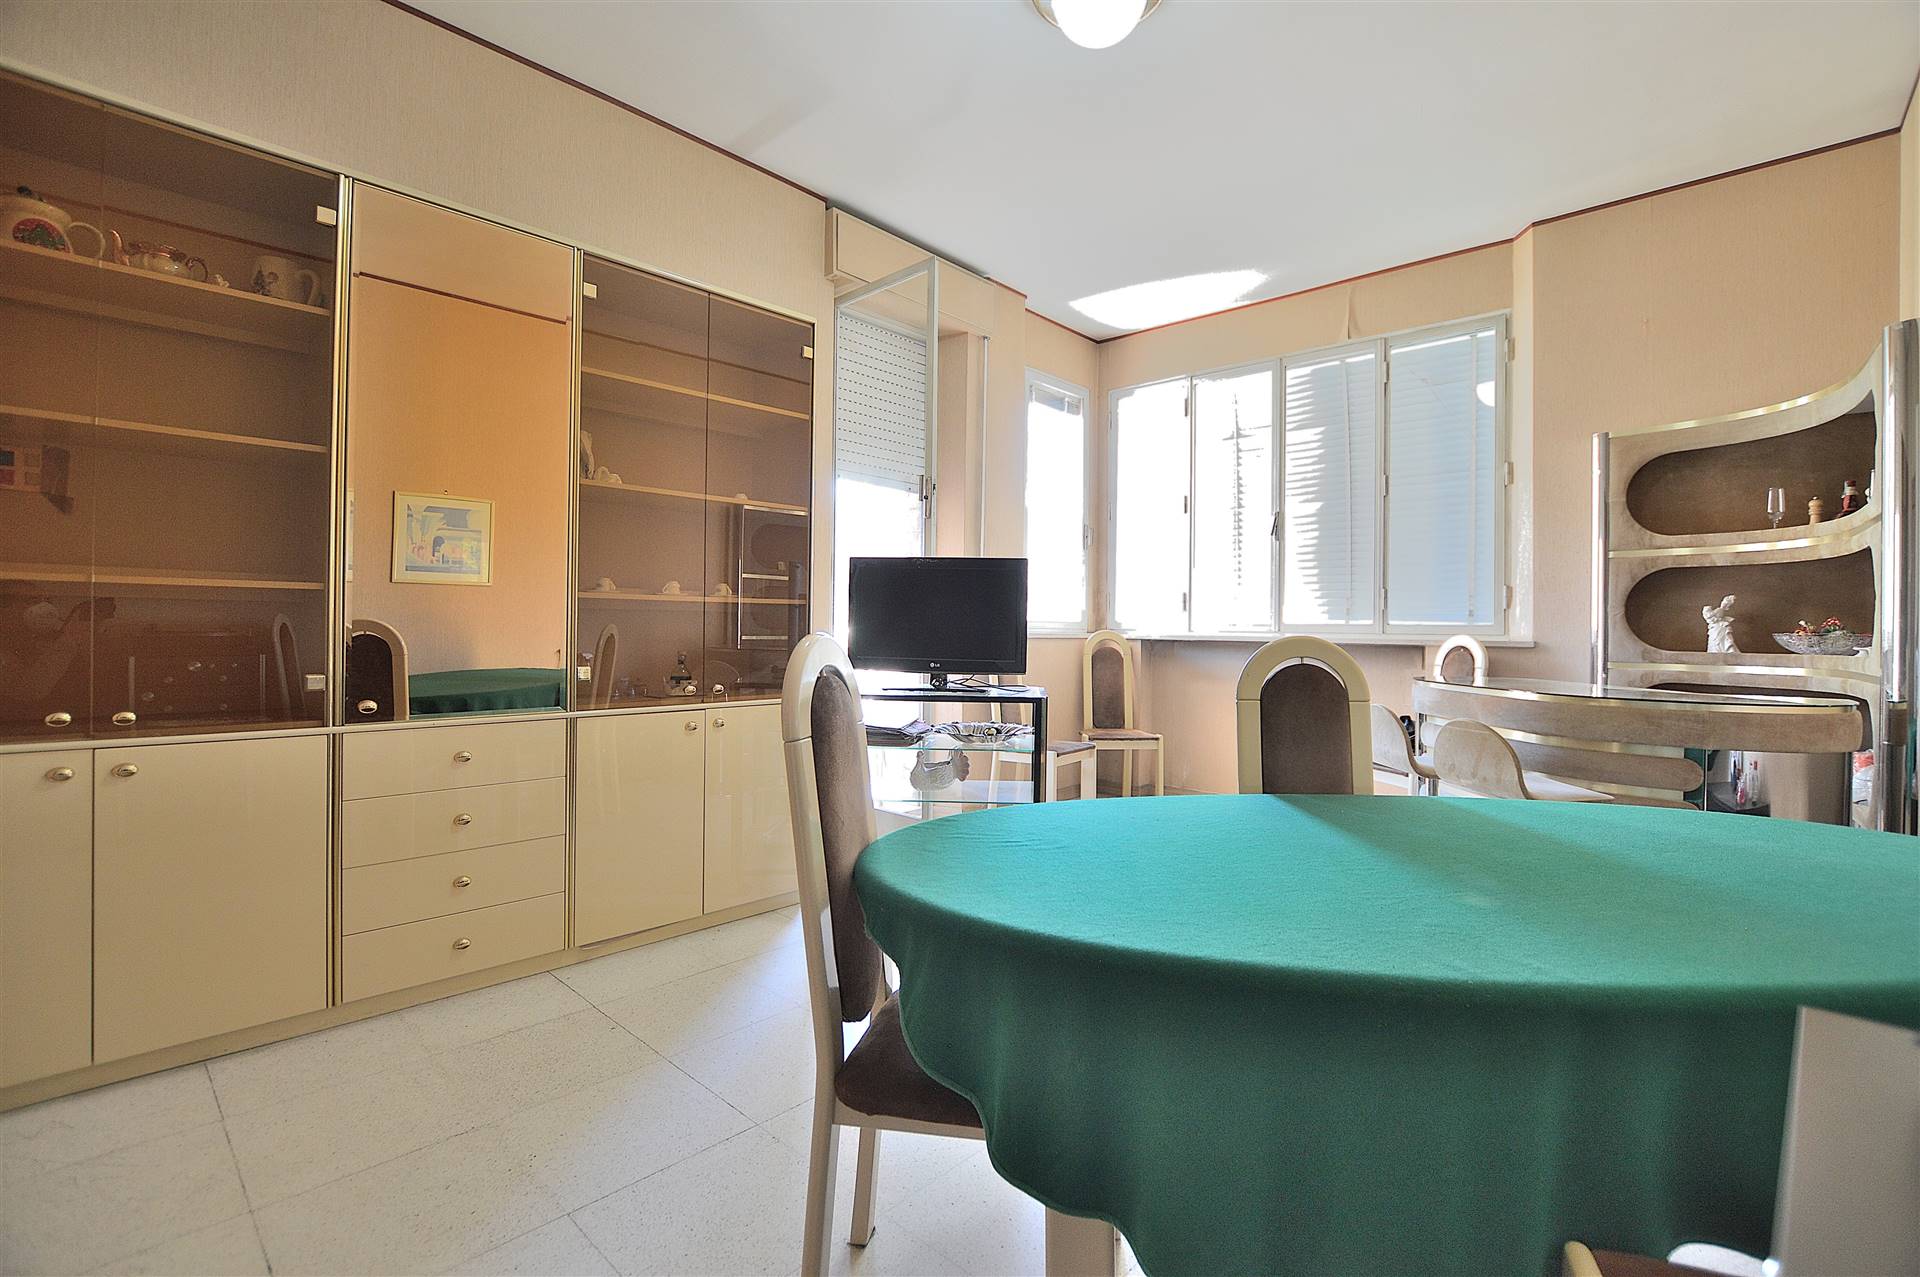 ACQUACALDA, SIENA, Apartment for sale of 70 Sq. mt., Habitable, Heating Individual heating system, Energetic class: G, Epi: 175 kwh/m2 year, placed 